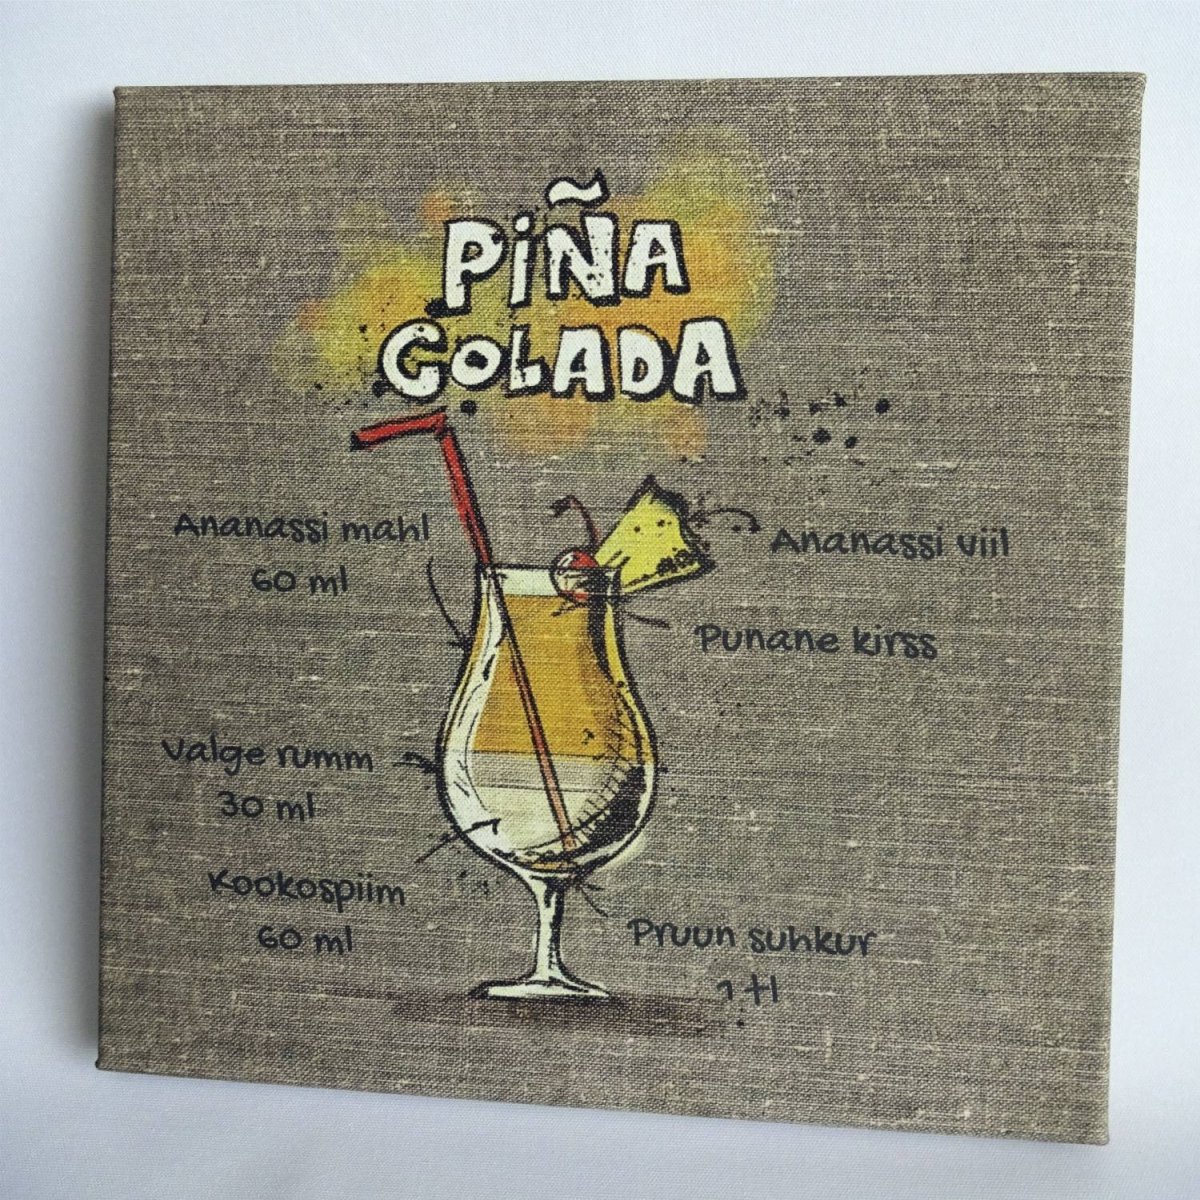 Recipe of your favourite coctail on a canvas - perfect in the kitchen!